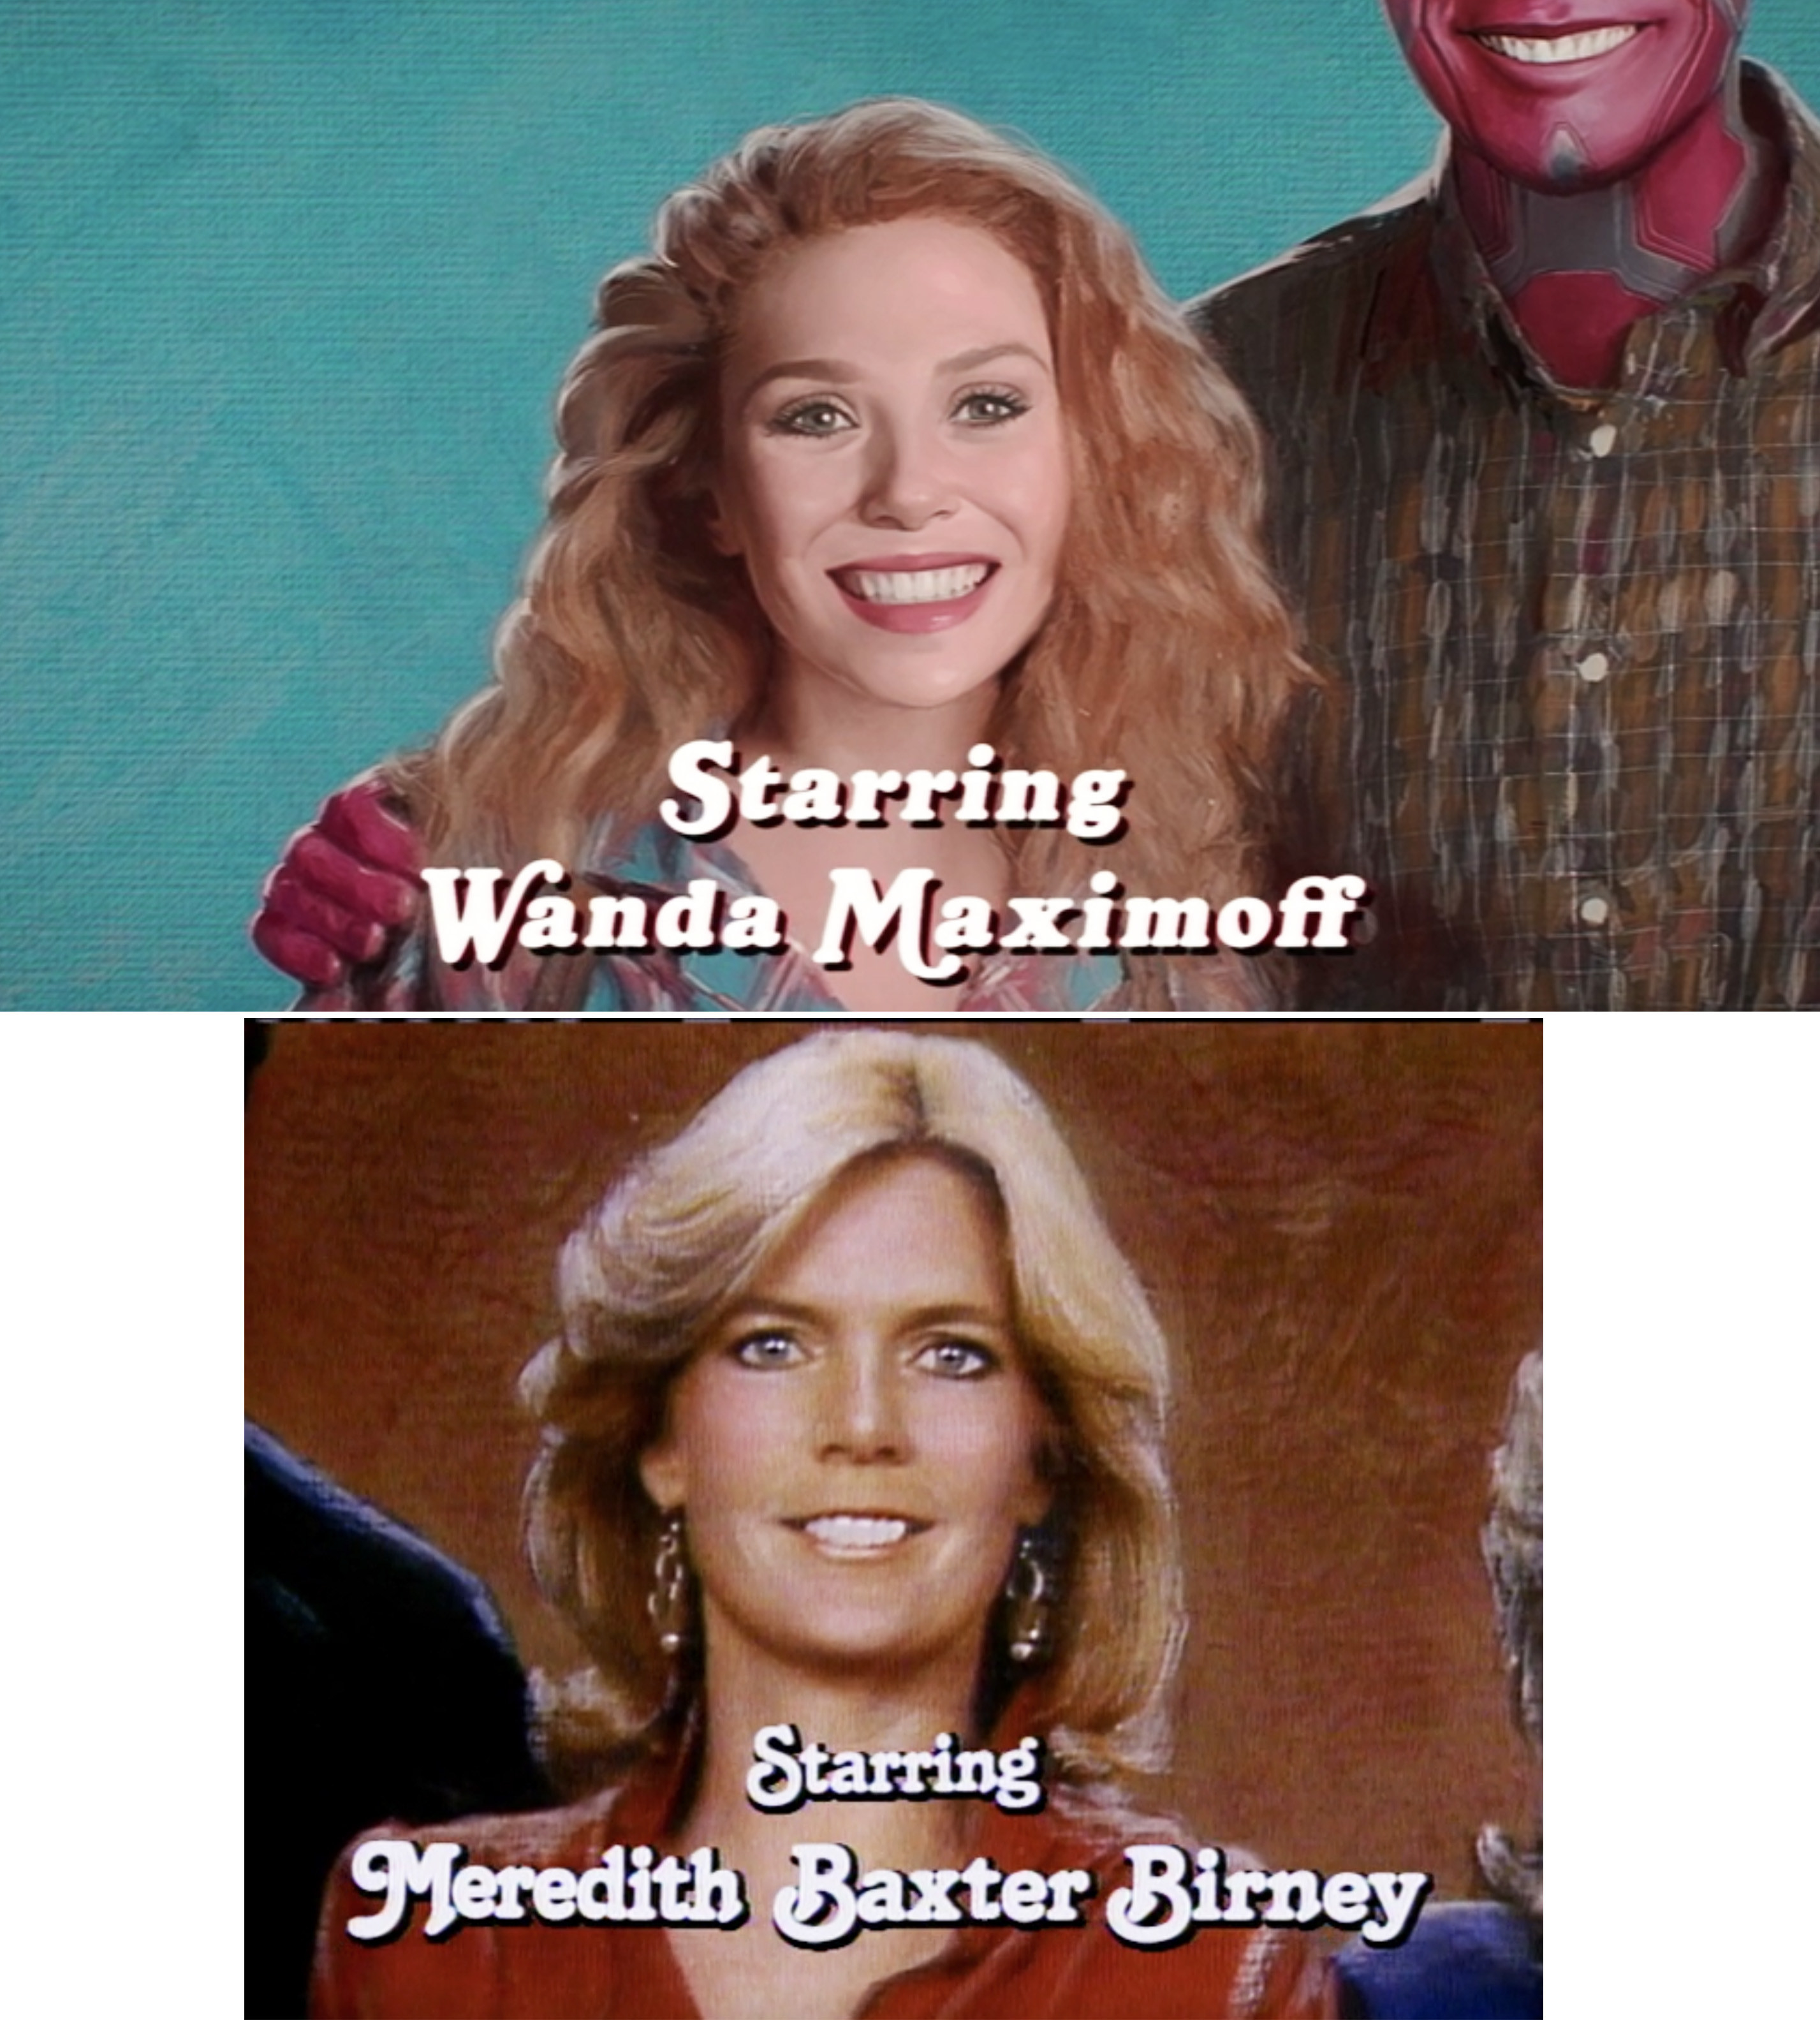 Wanda in the opening credits vs. Meredith Baxter Birney in the &quot;Family Ties&quot; opening credits